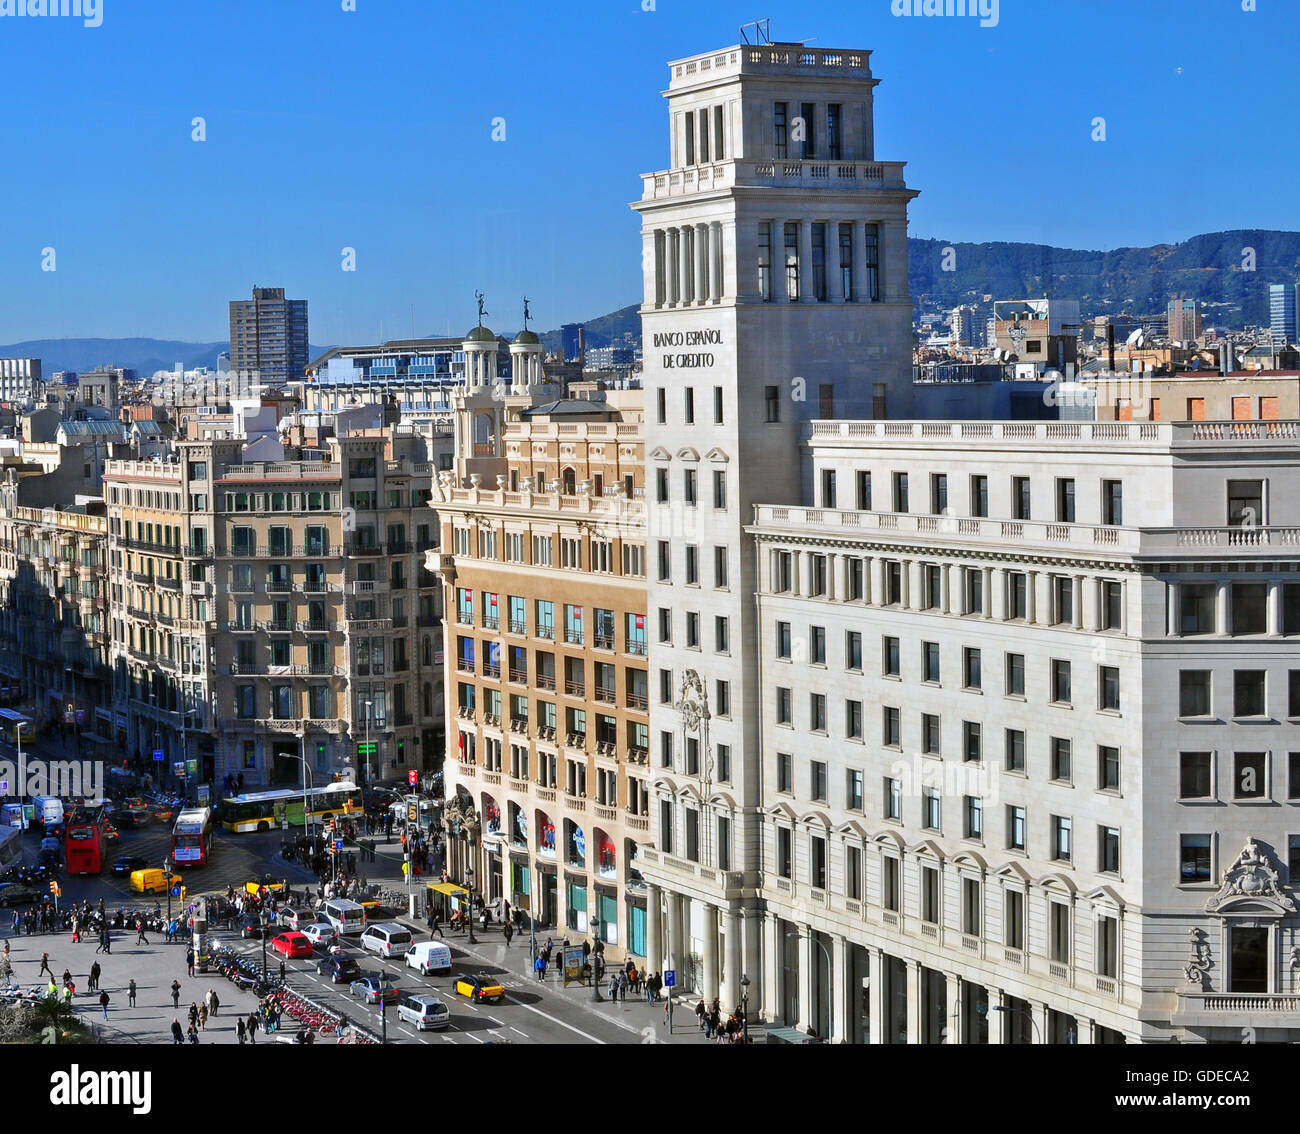 BARCELONA, SPAIN - DECEMBER 30: View of Square of Catalonia in centre of Barcelona on December 30, 2014. Stock Photo